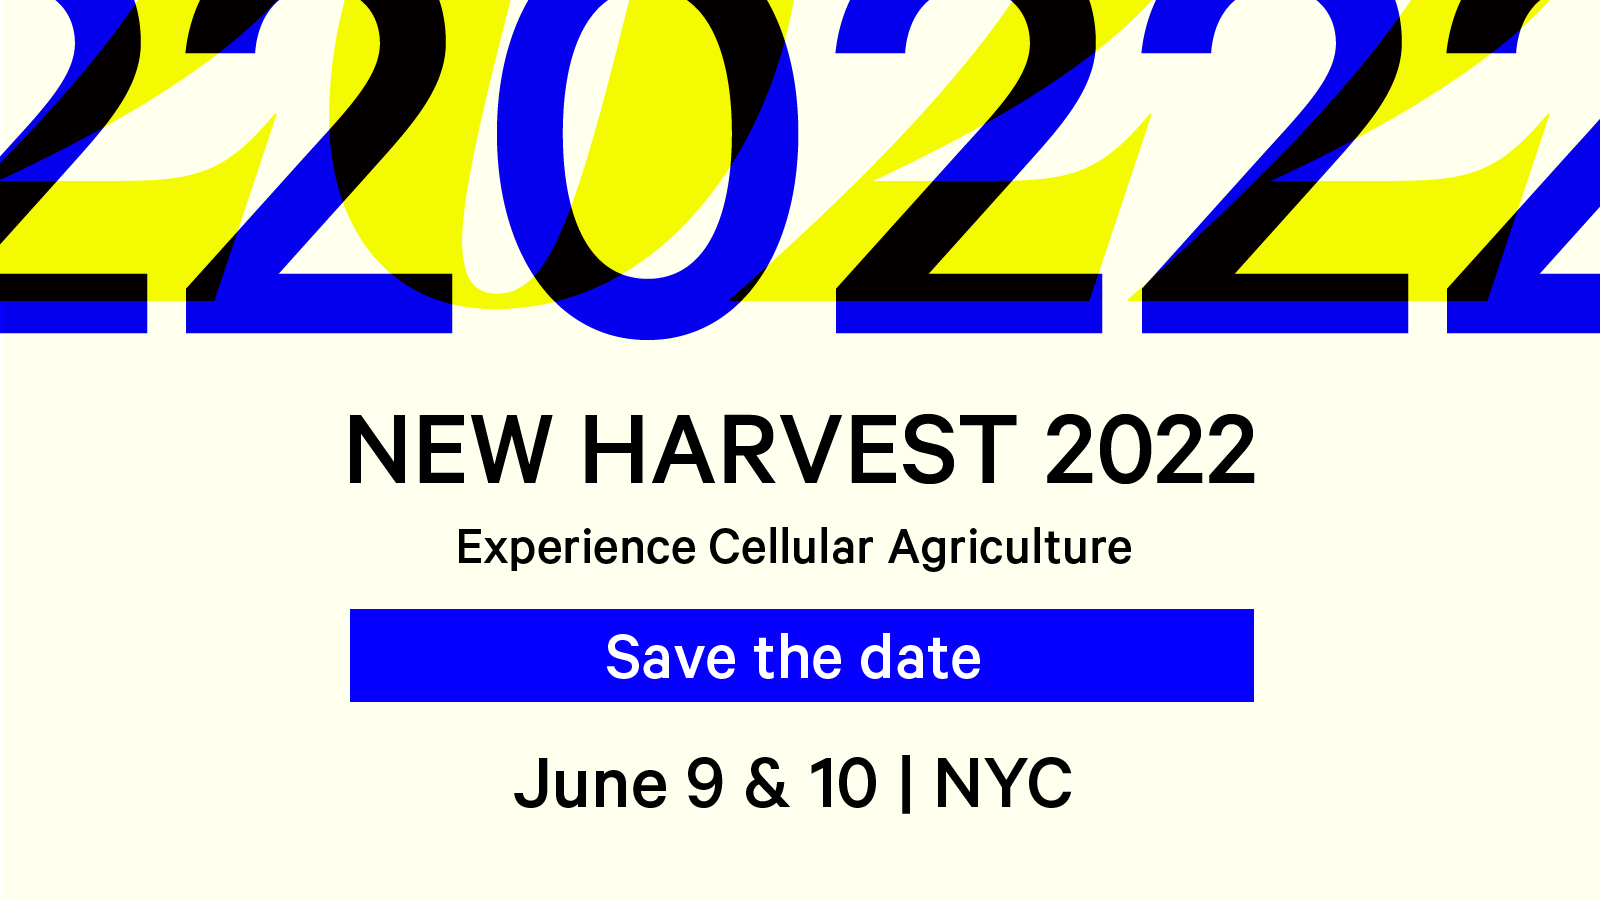 Save the date for New Harvest 2022, June 9 and 10 in NYC